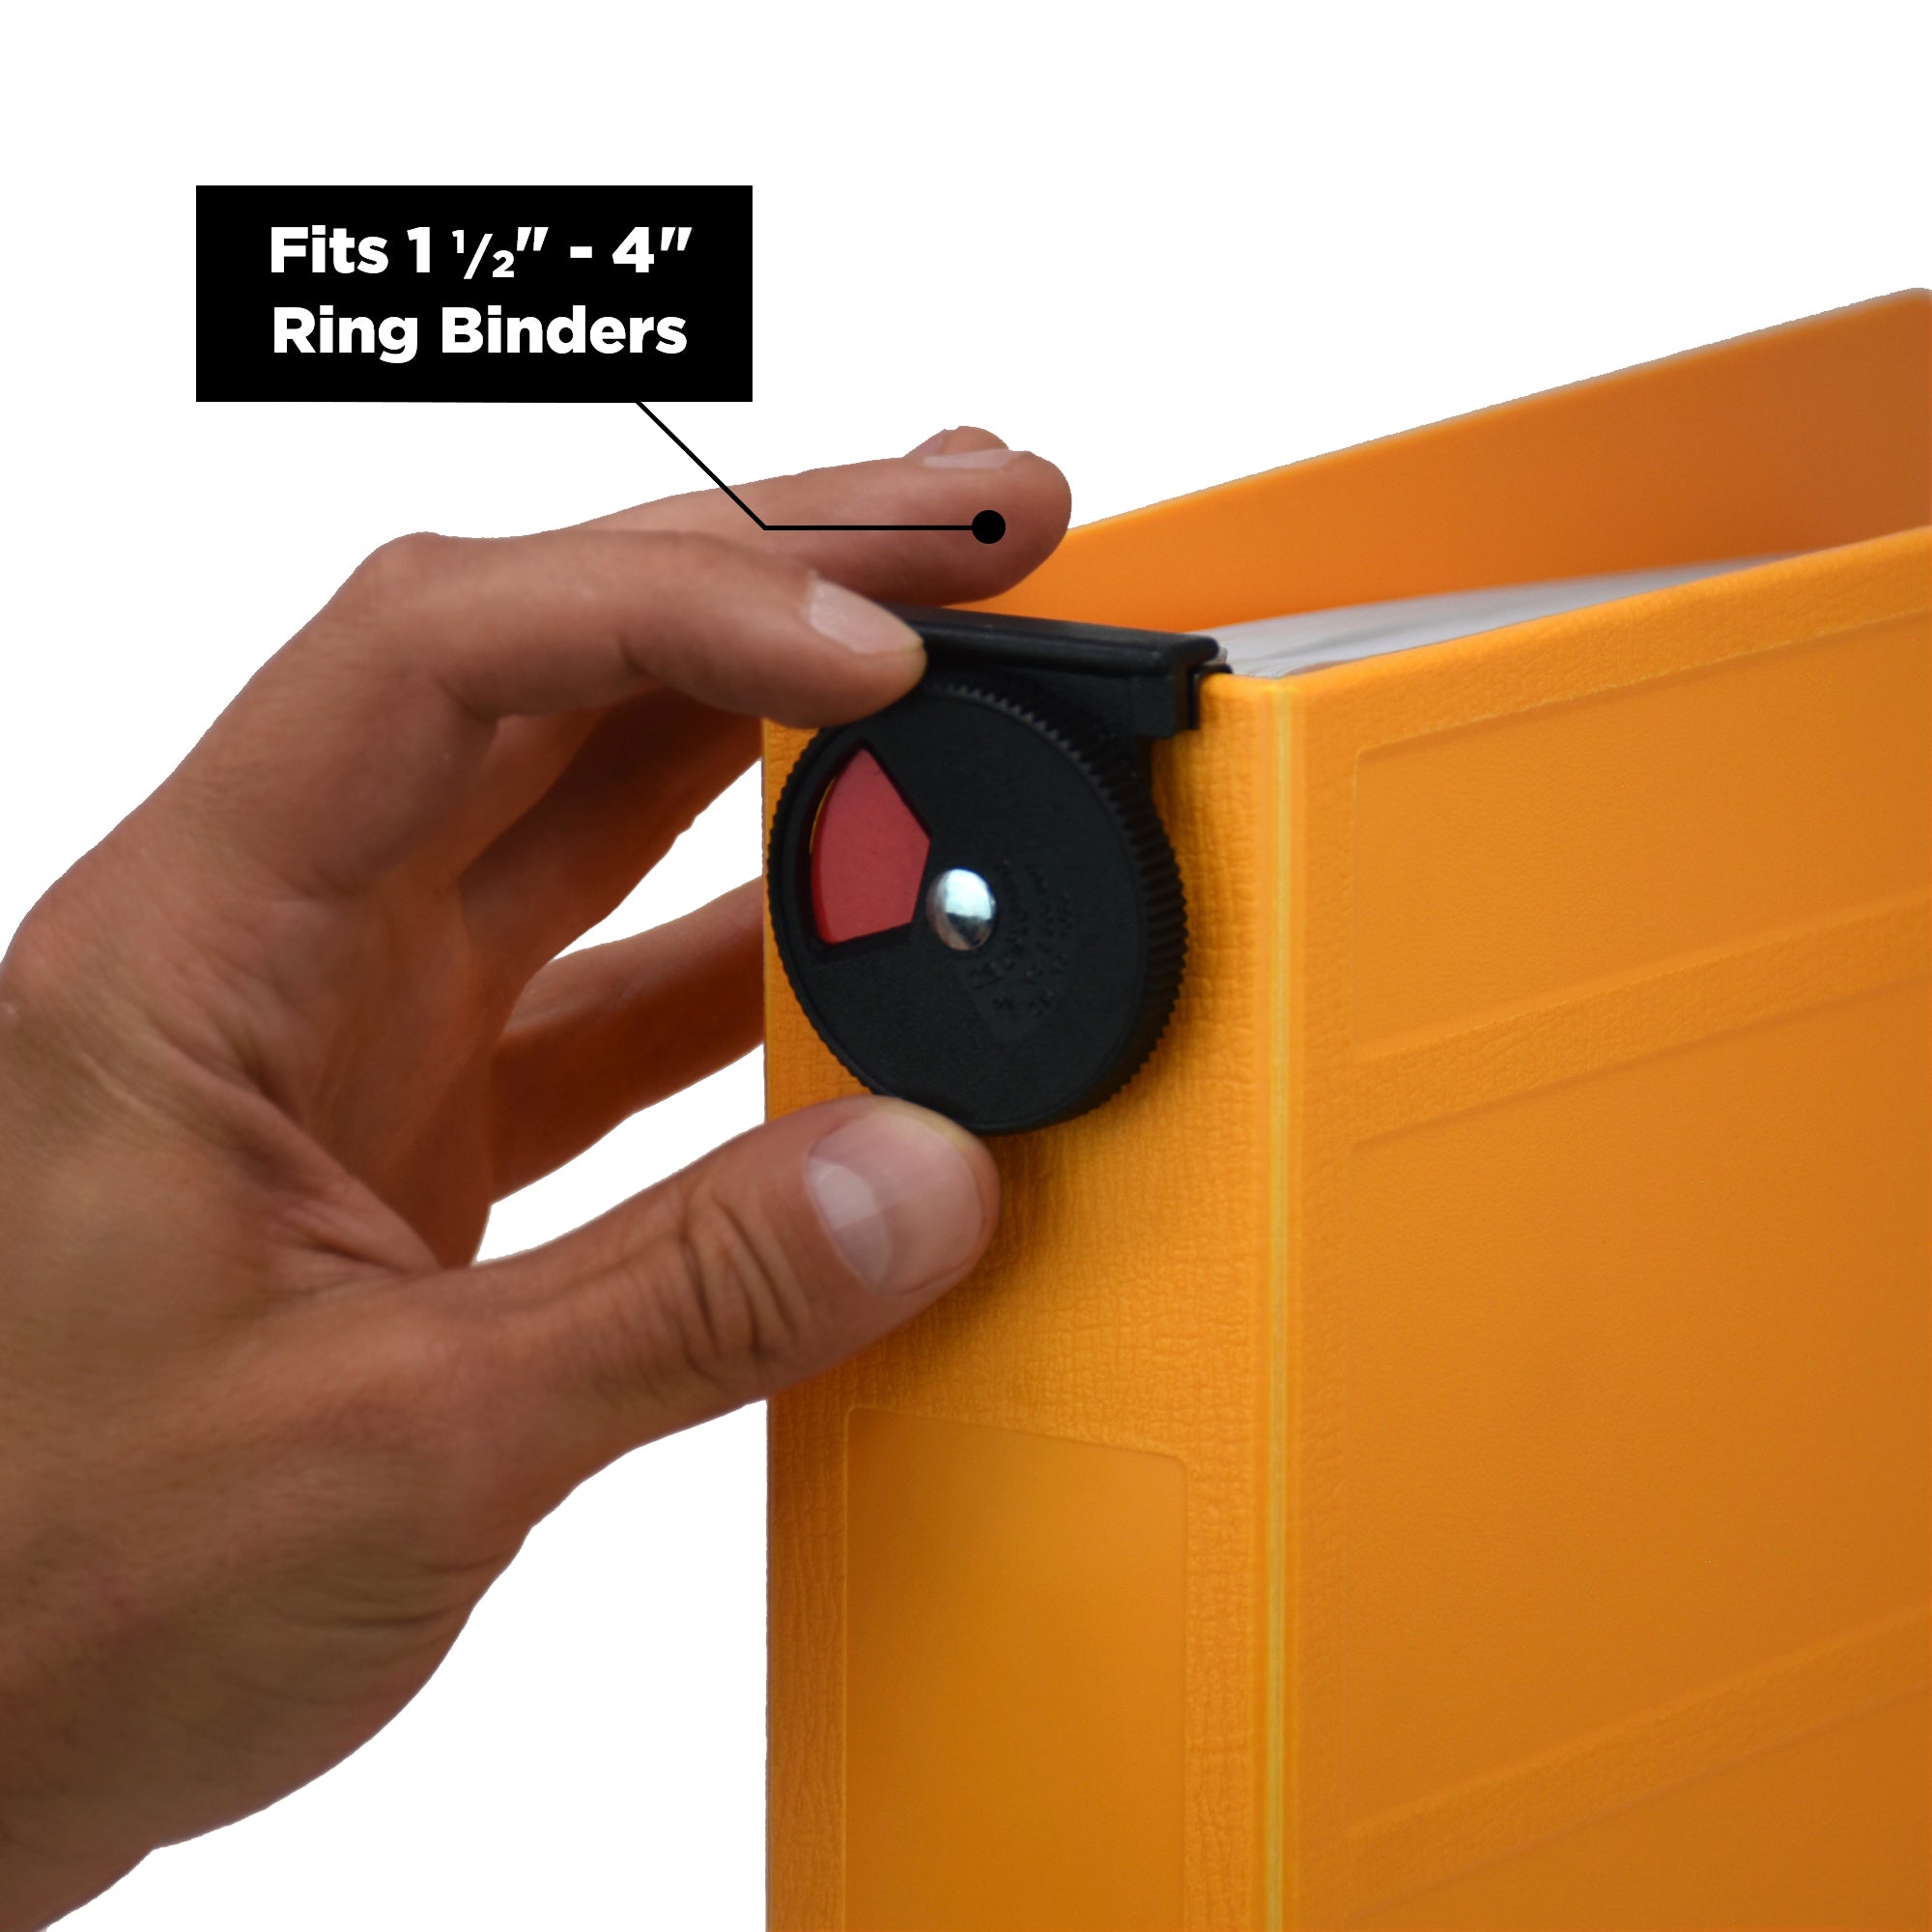 Five-Color Rotary Nurse Alert for Ring Binders